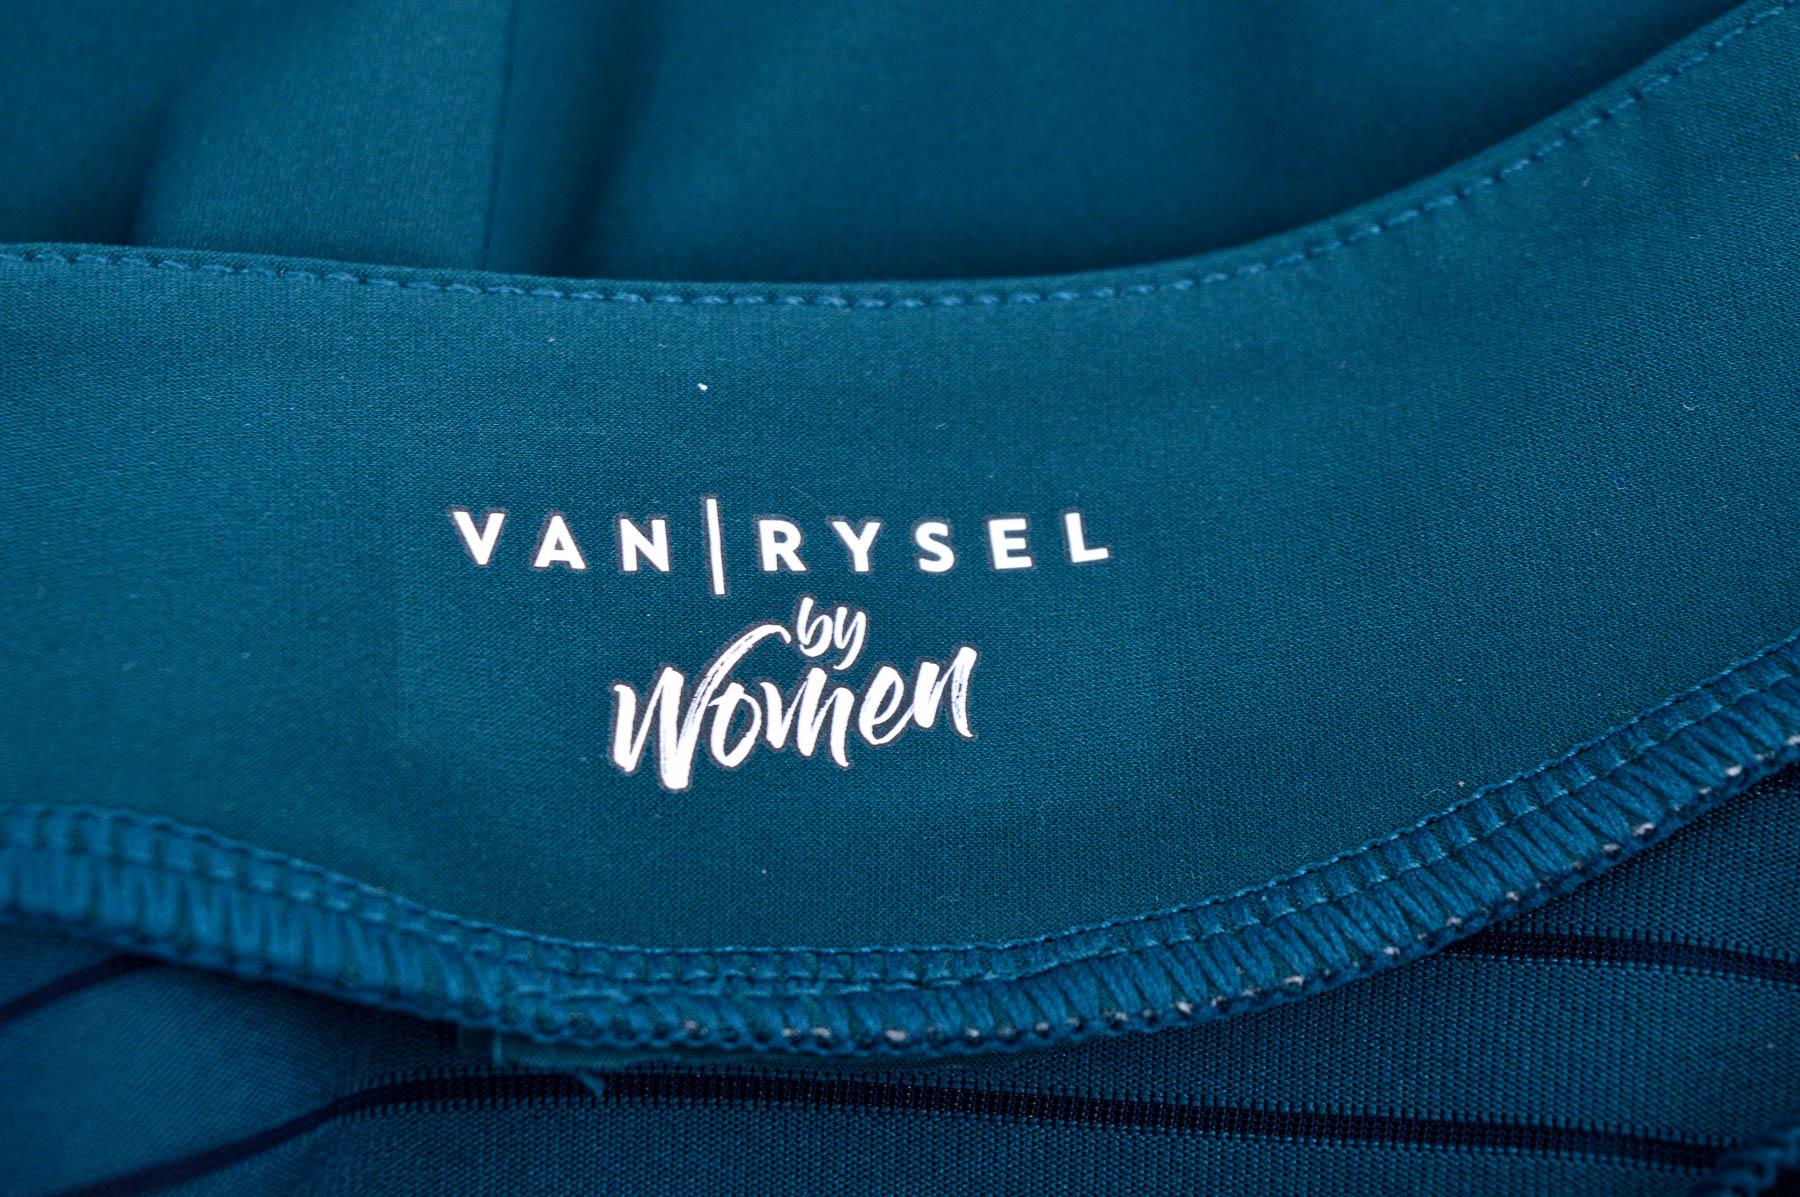 Female sports top for cycling - VAN RYSEL - 2